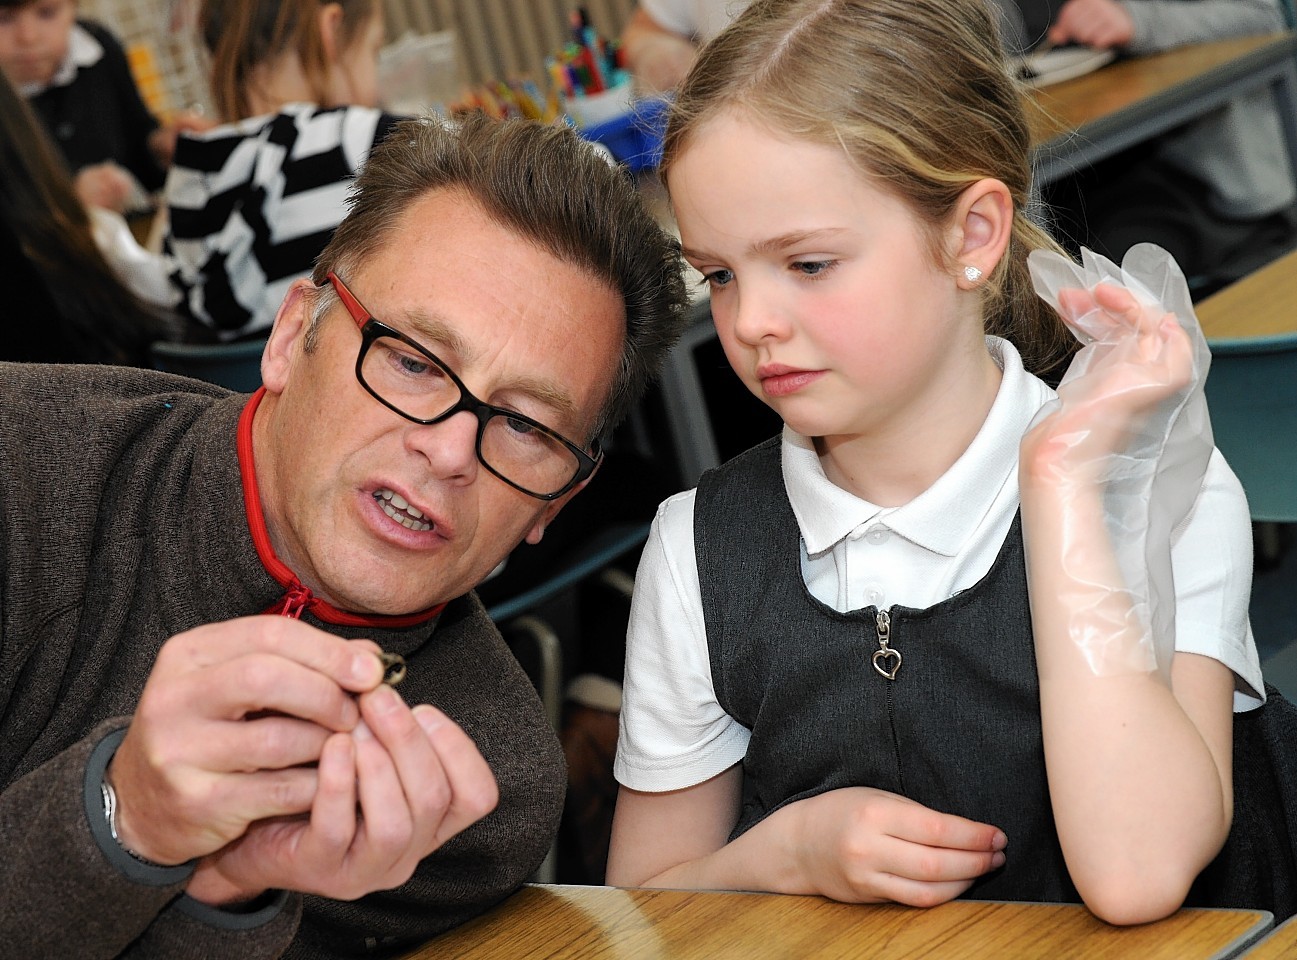 TV presenter and naturalist Chris Packham visits Abbotswell Primary School to highlight what Aberdeen and District RSPB are doing to connect children with nature. Part of the group's 40th anniversary. 